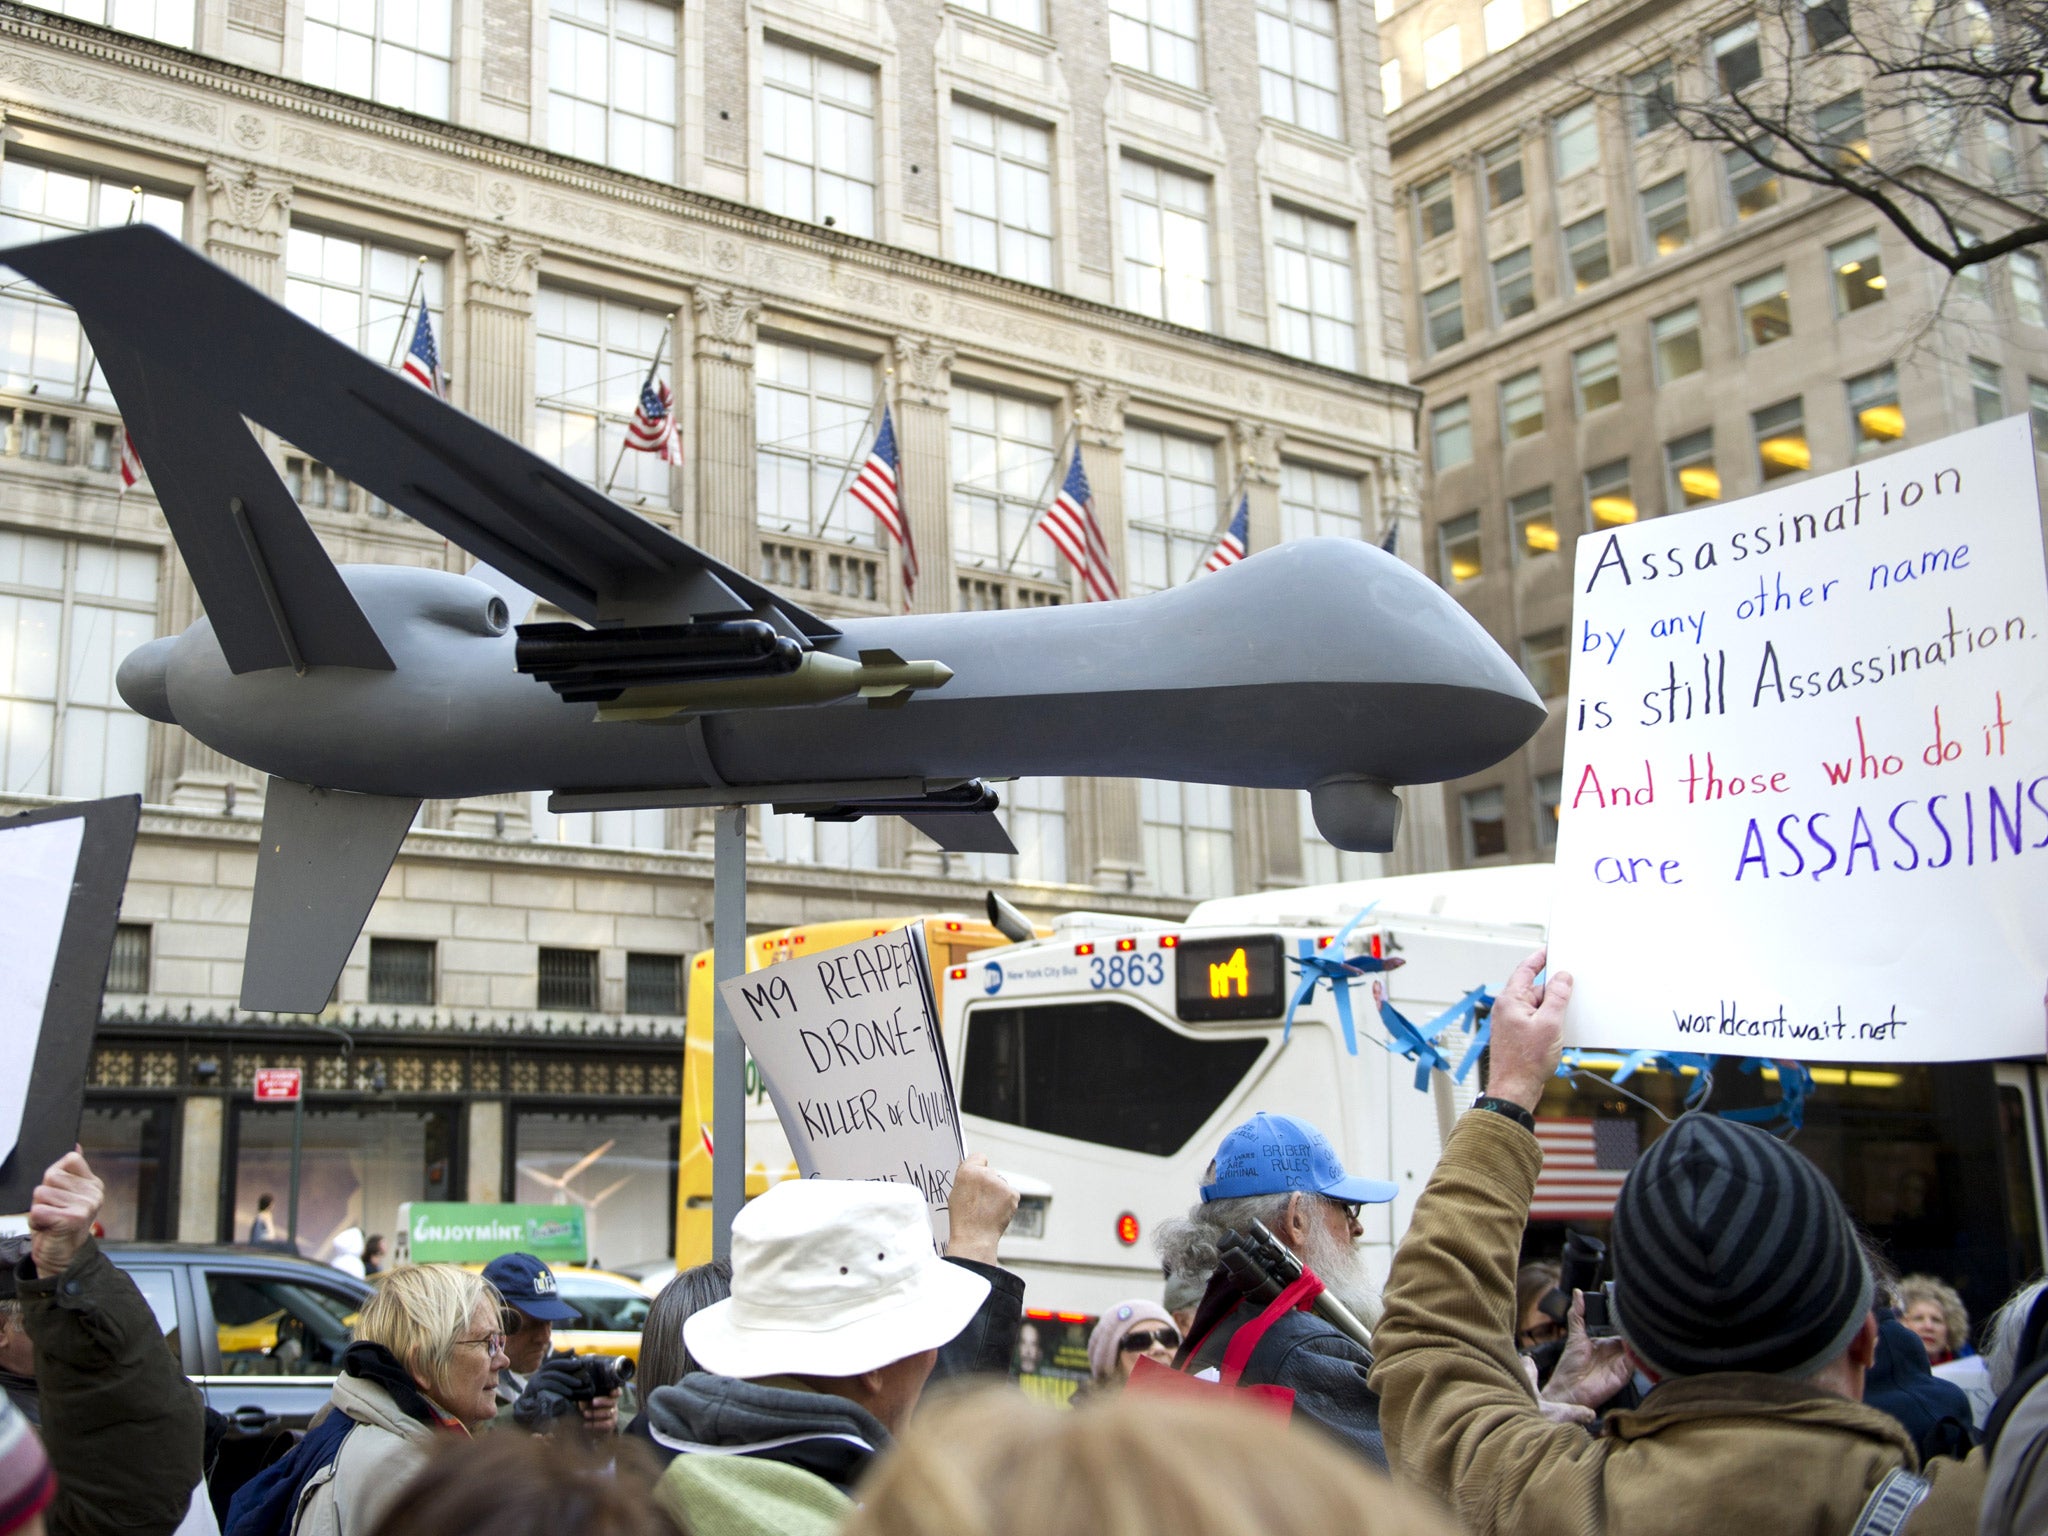 An anti drone protest in New York City last week